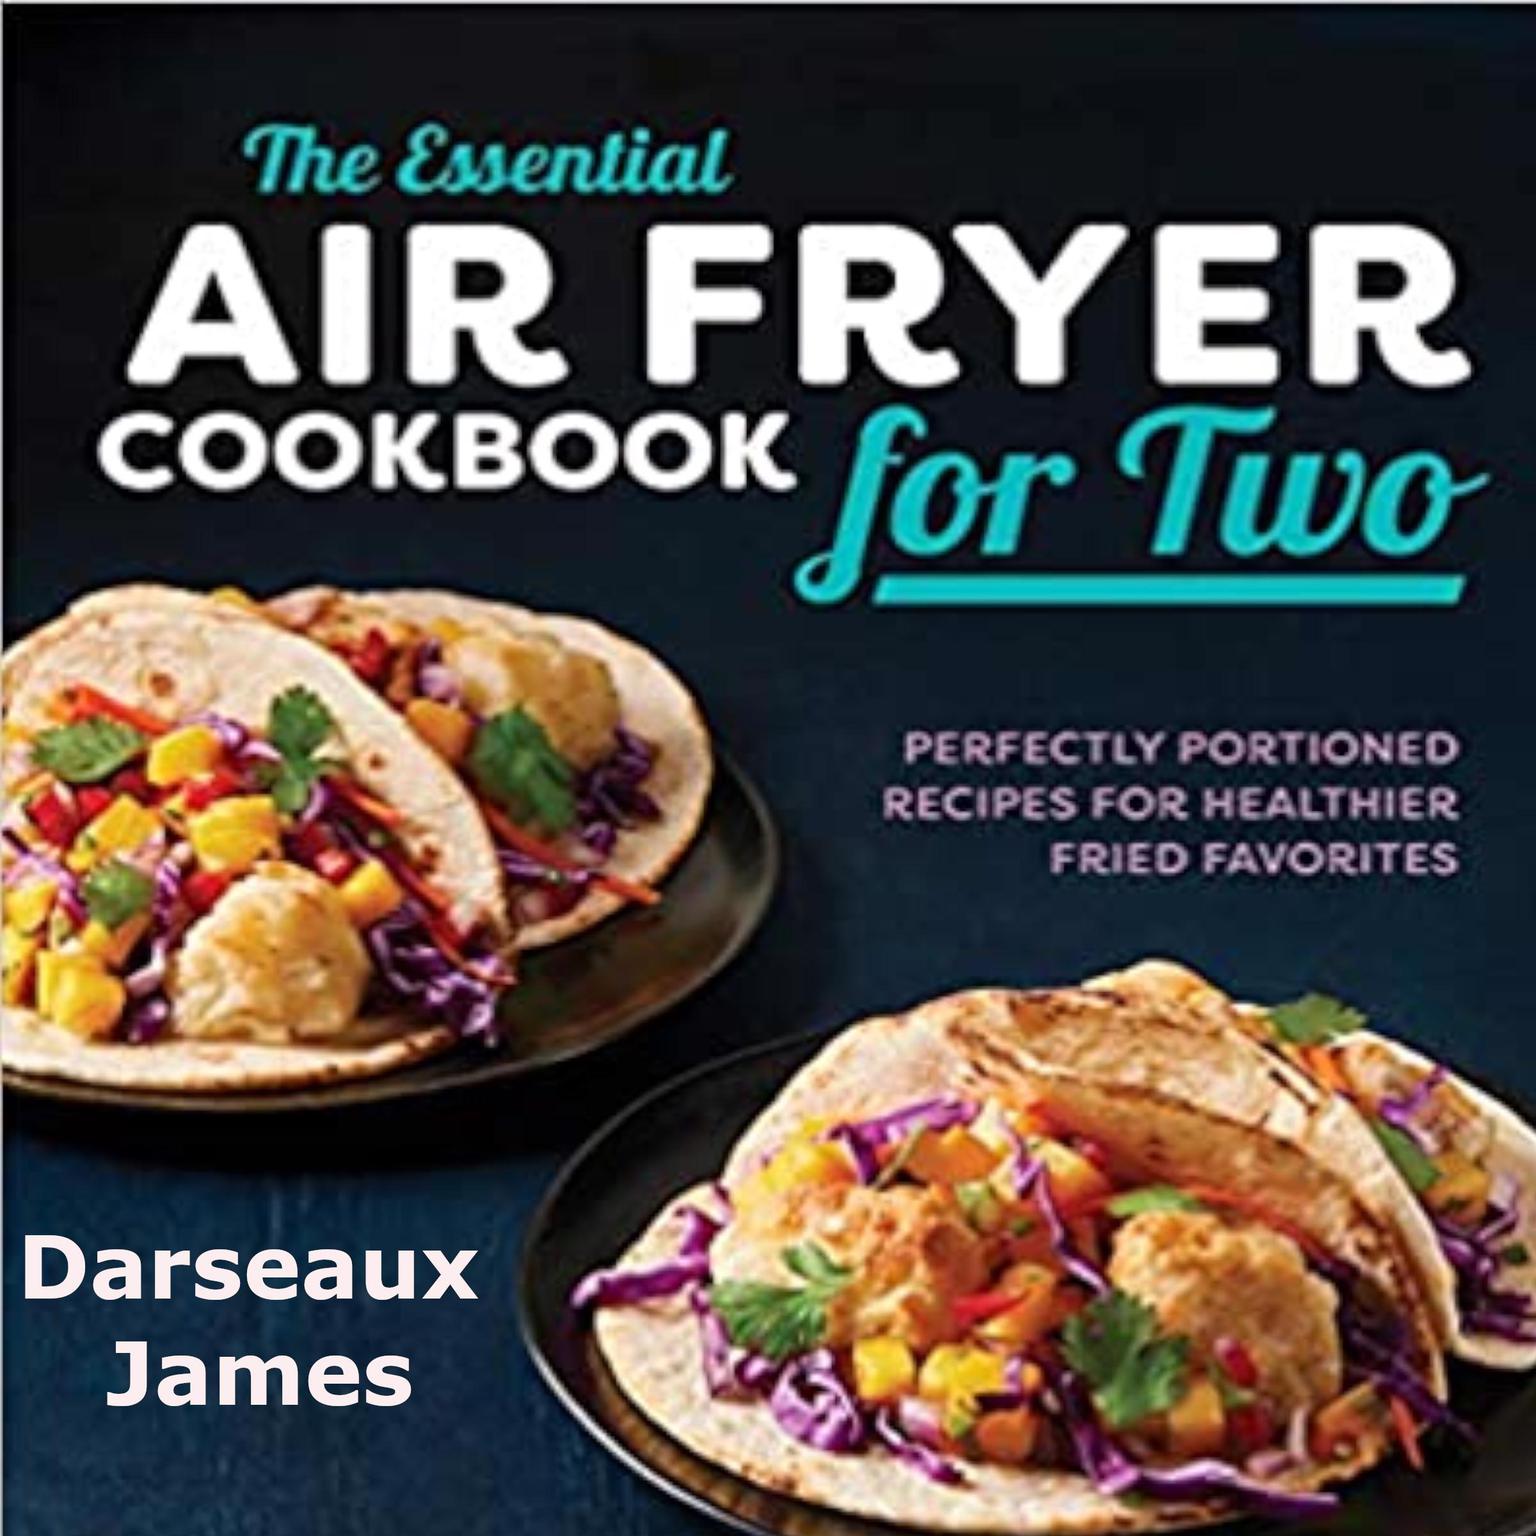 The Essential Air Fryer Cookbook for Two: : Perfectly Portioned Recipes For Healthier Fried Favorites Audiobook, by Darseaux James